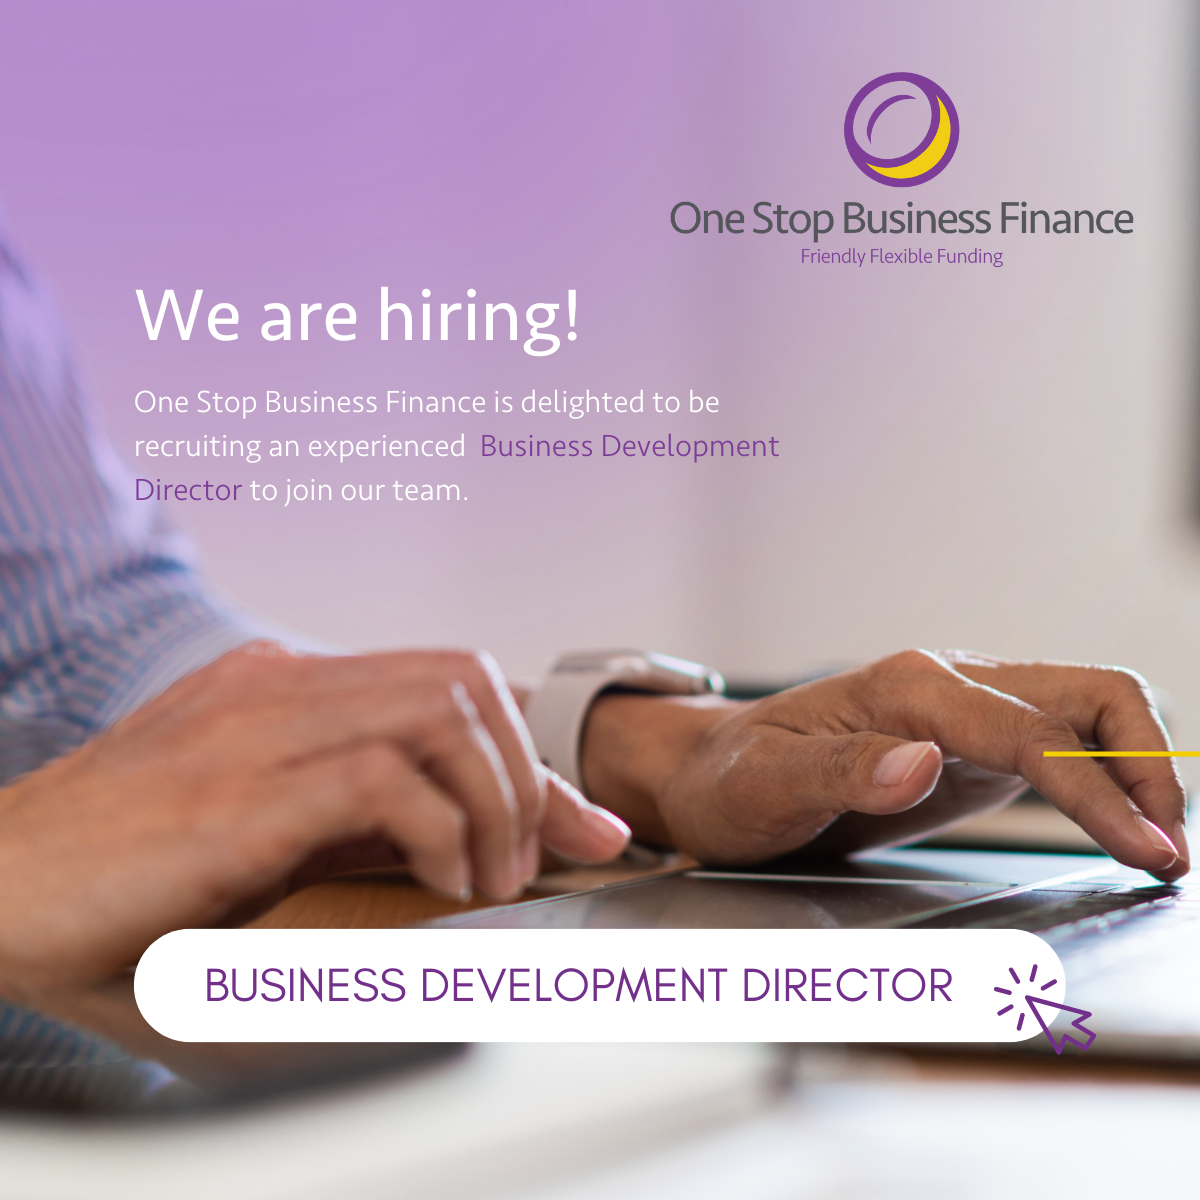 We're hiring! We're looking for an experienced Business Development Director